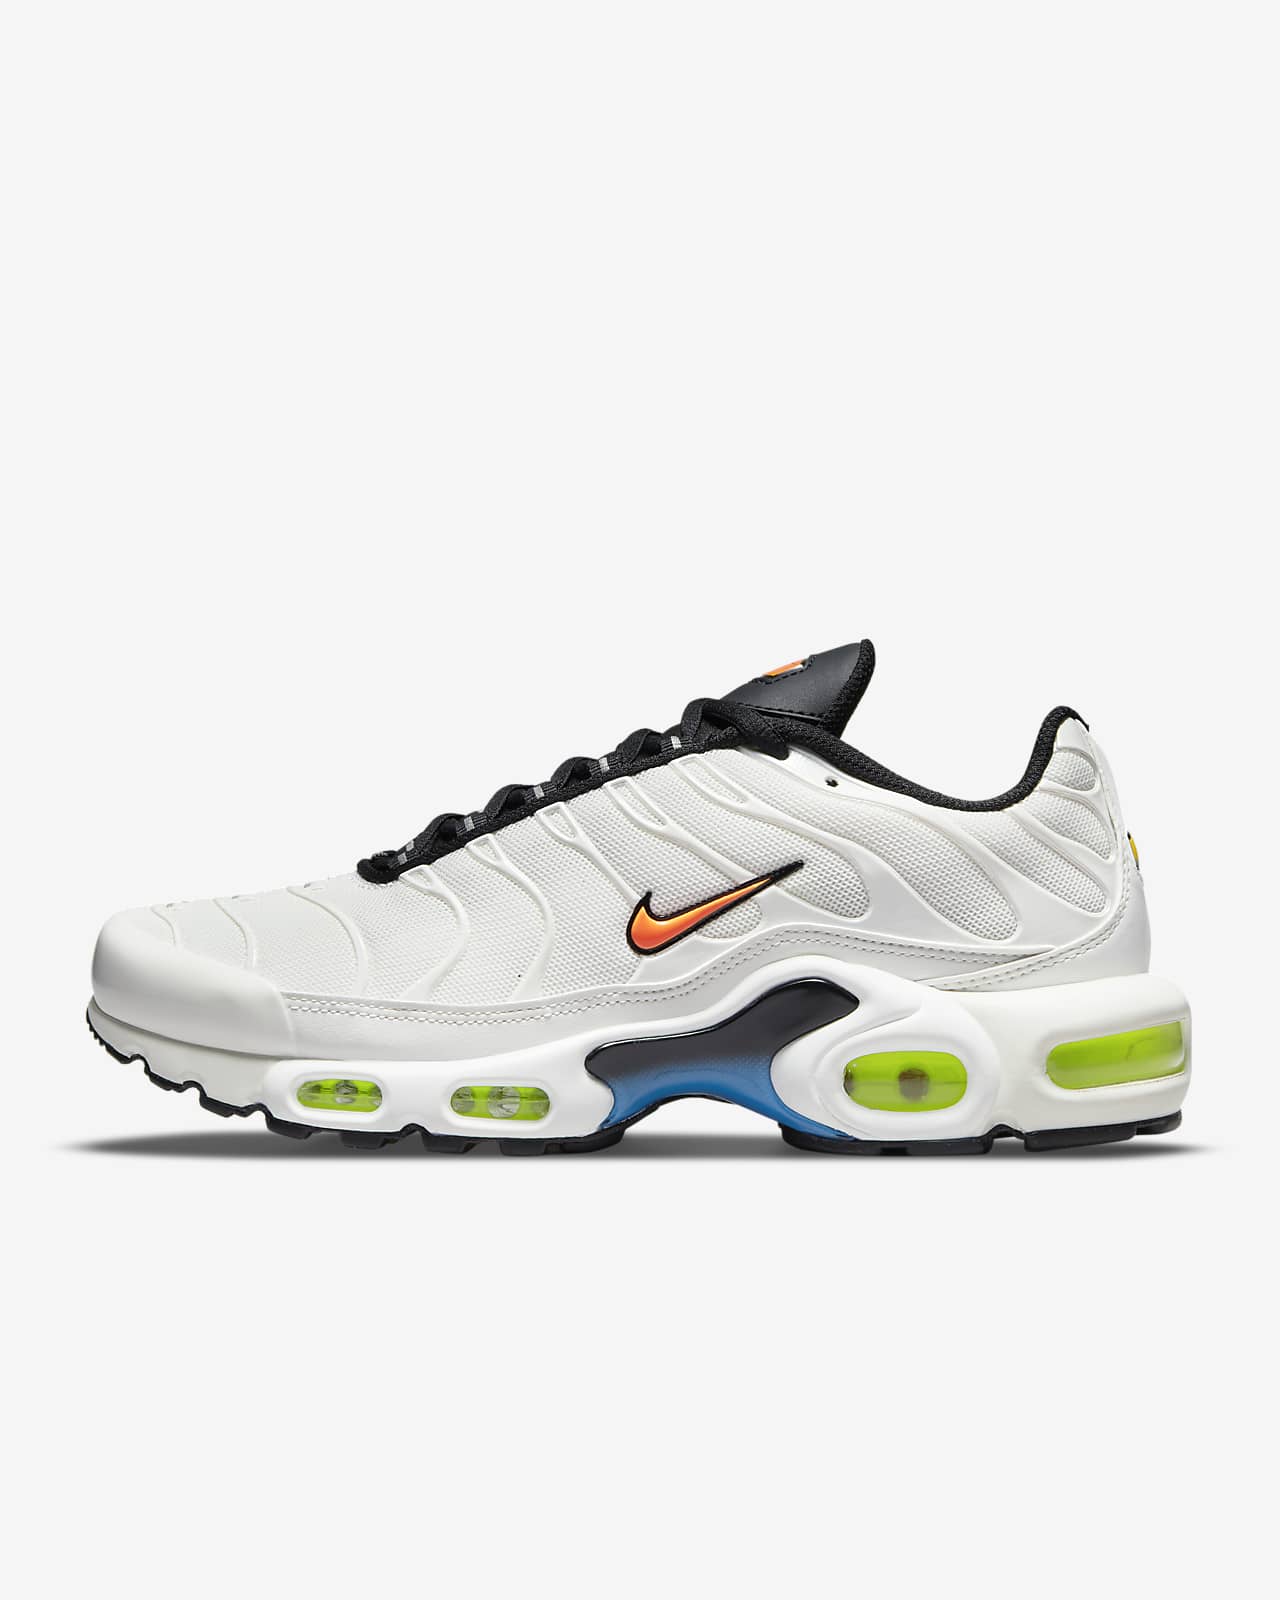 Nike Air Max Plus Women's Shoes in White, Size: 11 | DQ4696-100